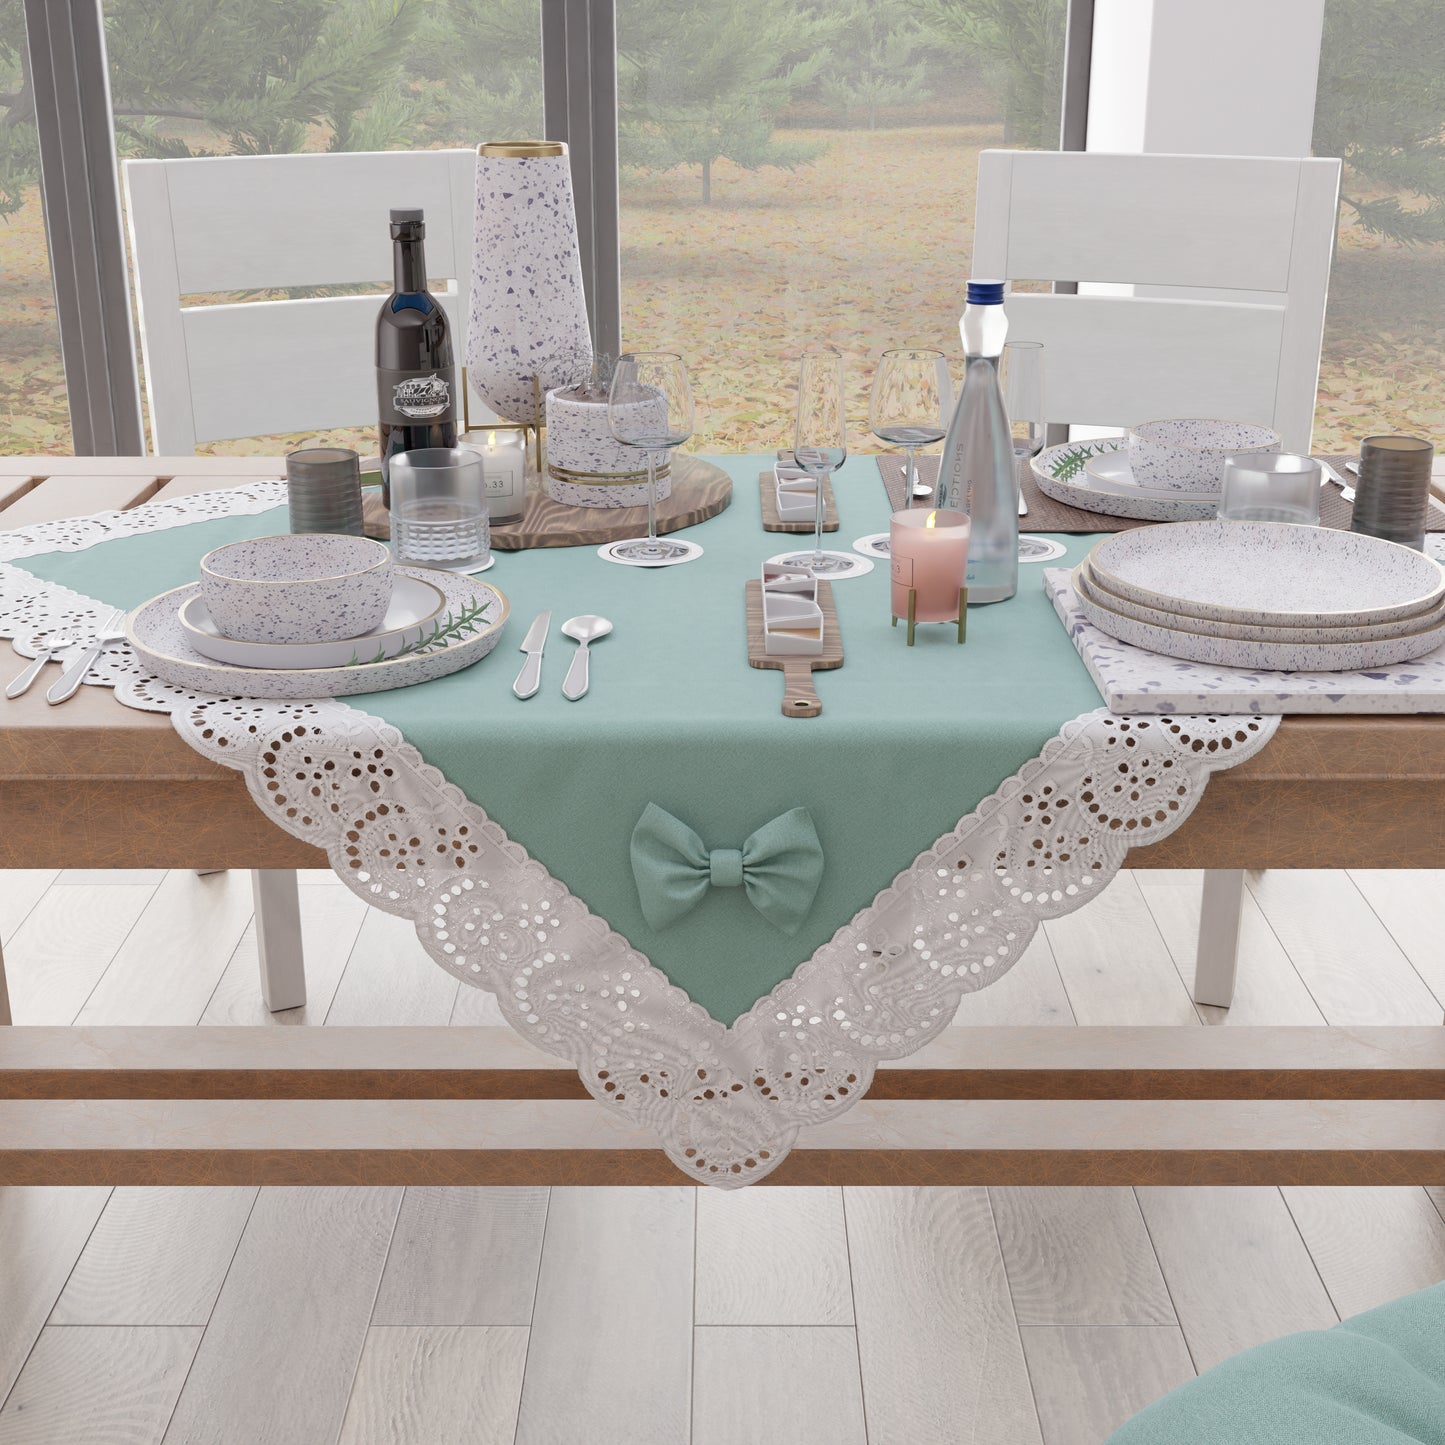 Elegant Shabby Chic Kitchen Centerpiece with Lace and Teal Bows 